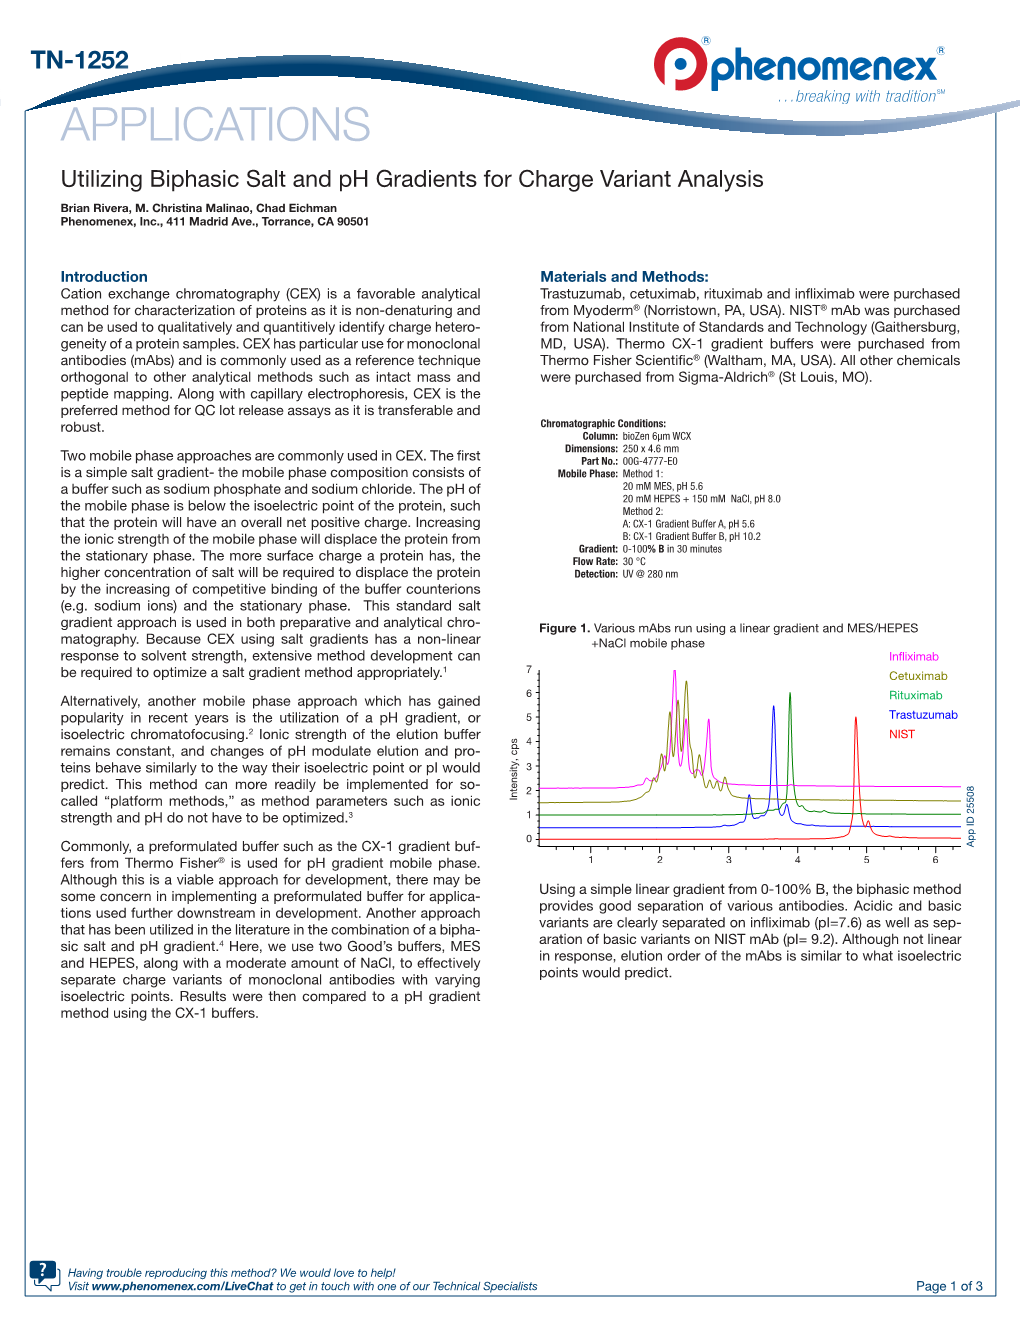 APPLICATIONS Utilizing Biphasic Salt and Ph Gradients for Charge Variant Analysis Brian Rivera, M